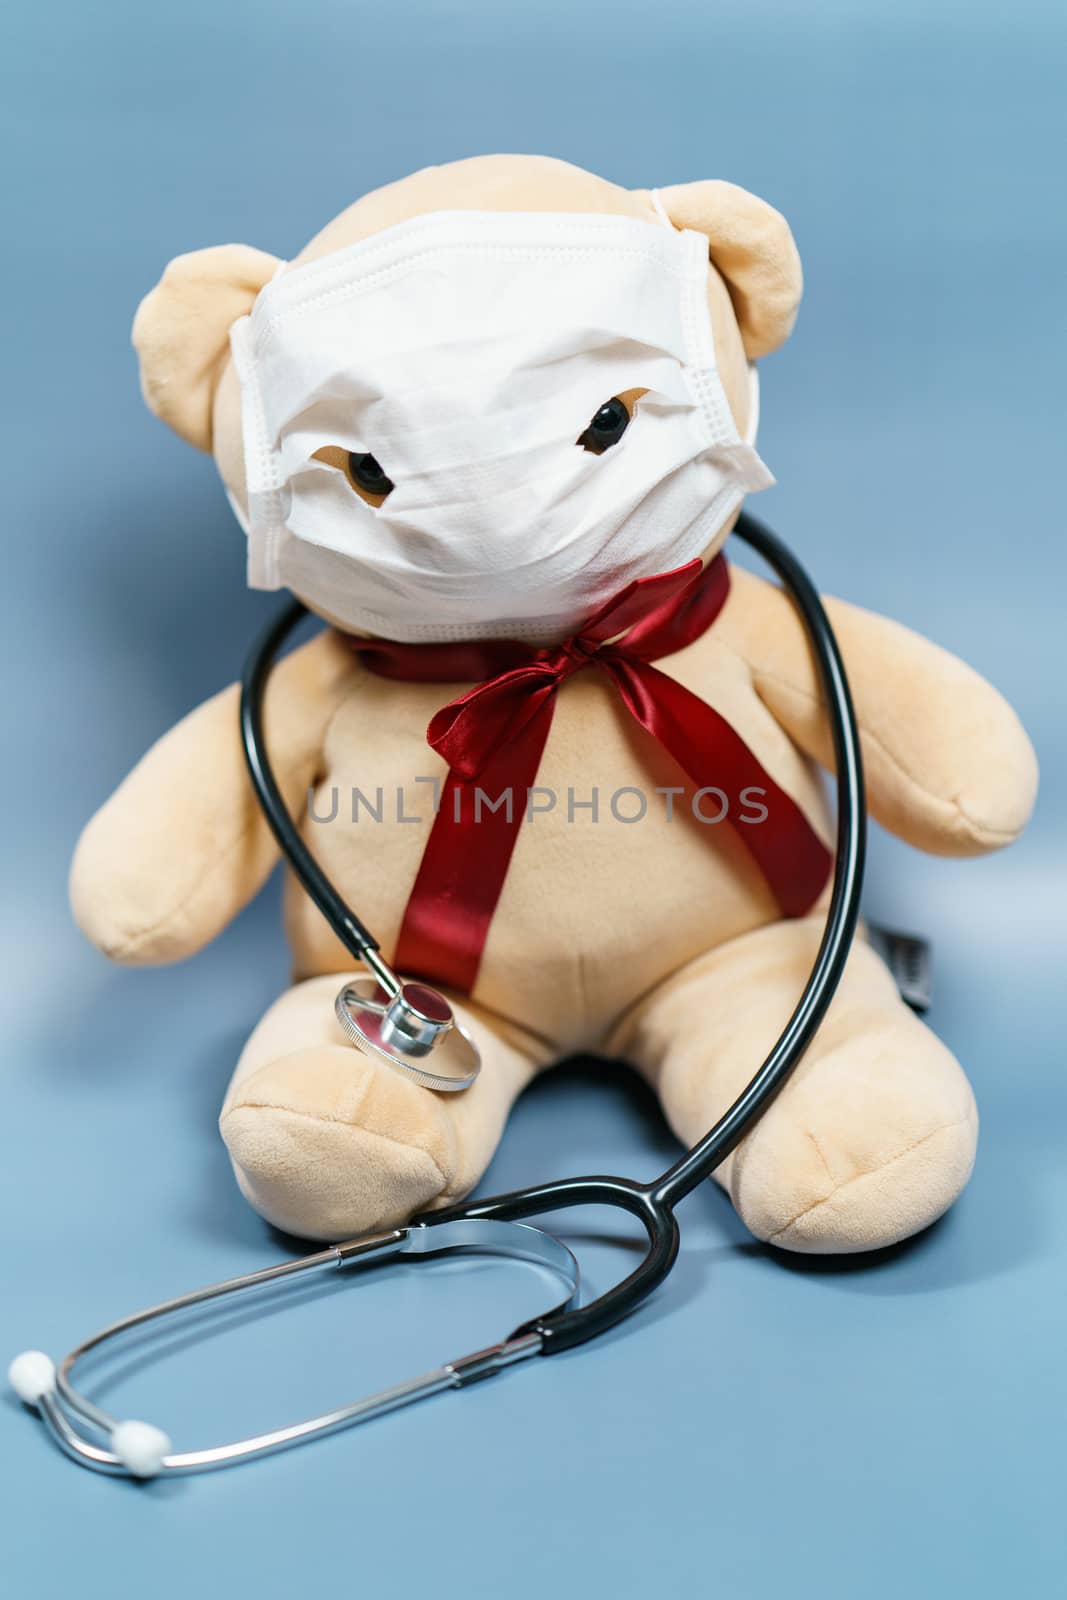 Teddy bear wearing mask and stethoscope. Coronavirus covid-19 and protection concept.